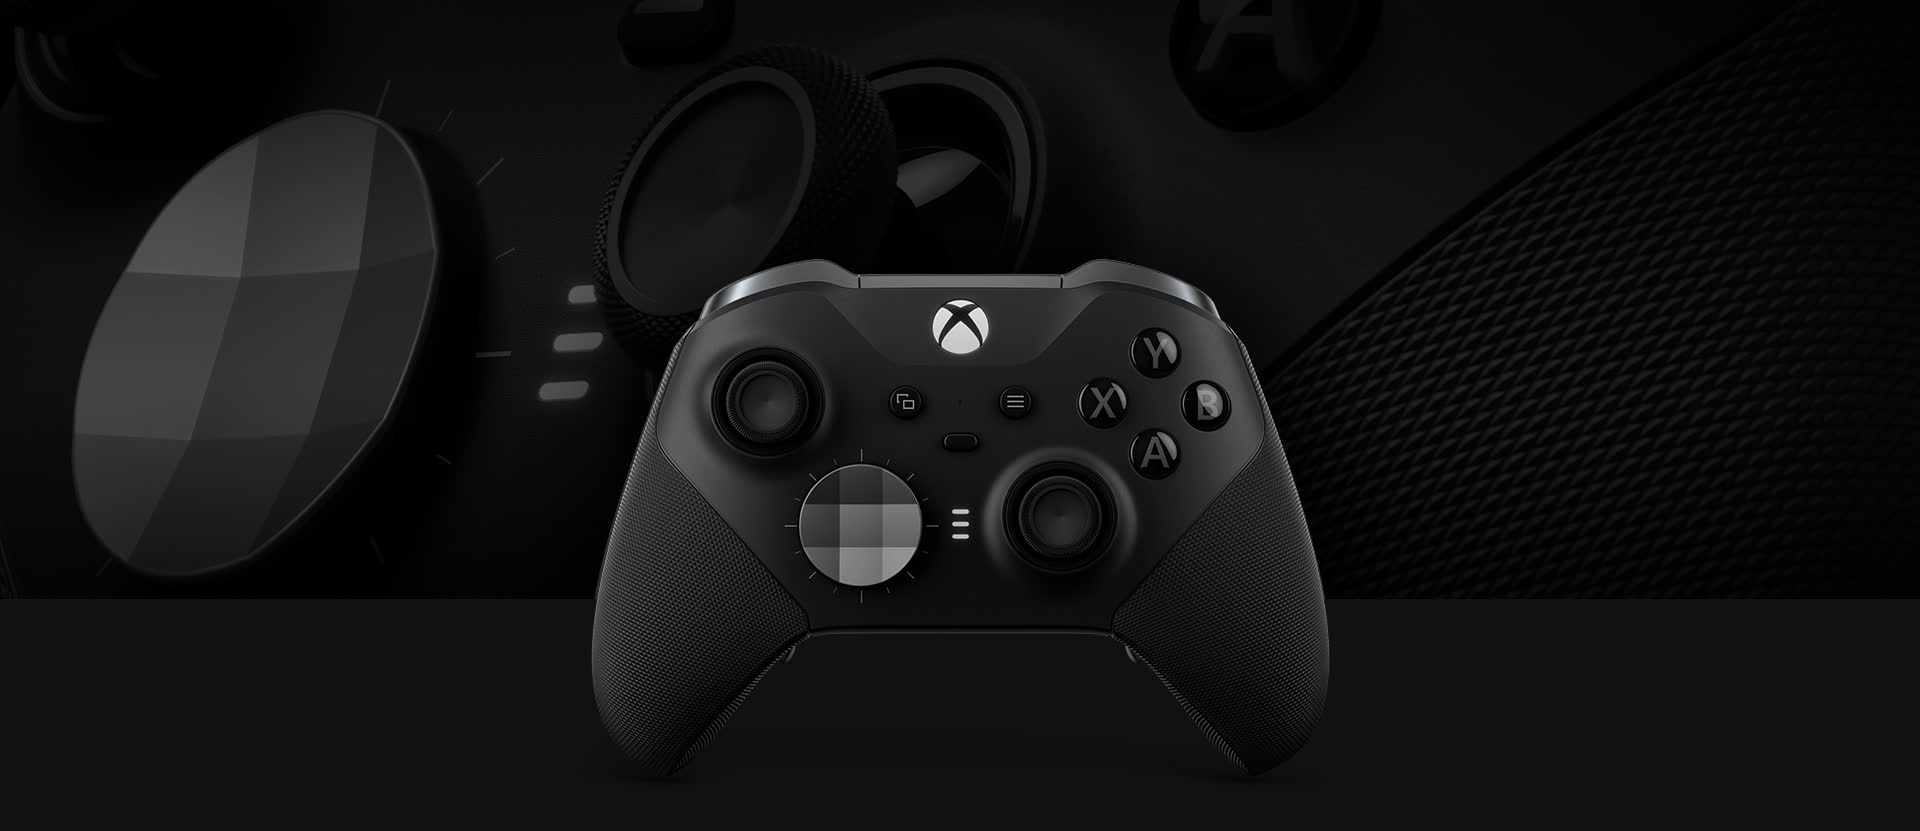 Microsoft extends Xbox Elite 2 controller warranty from 90 days to one year following hardware complaints